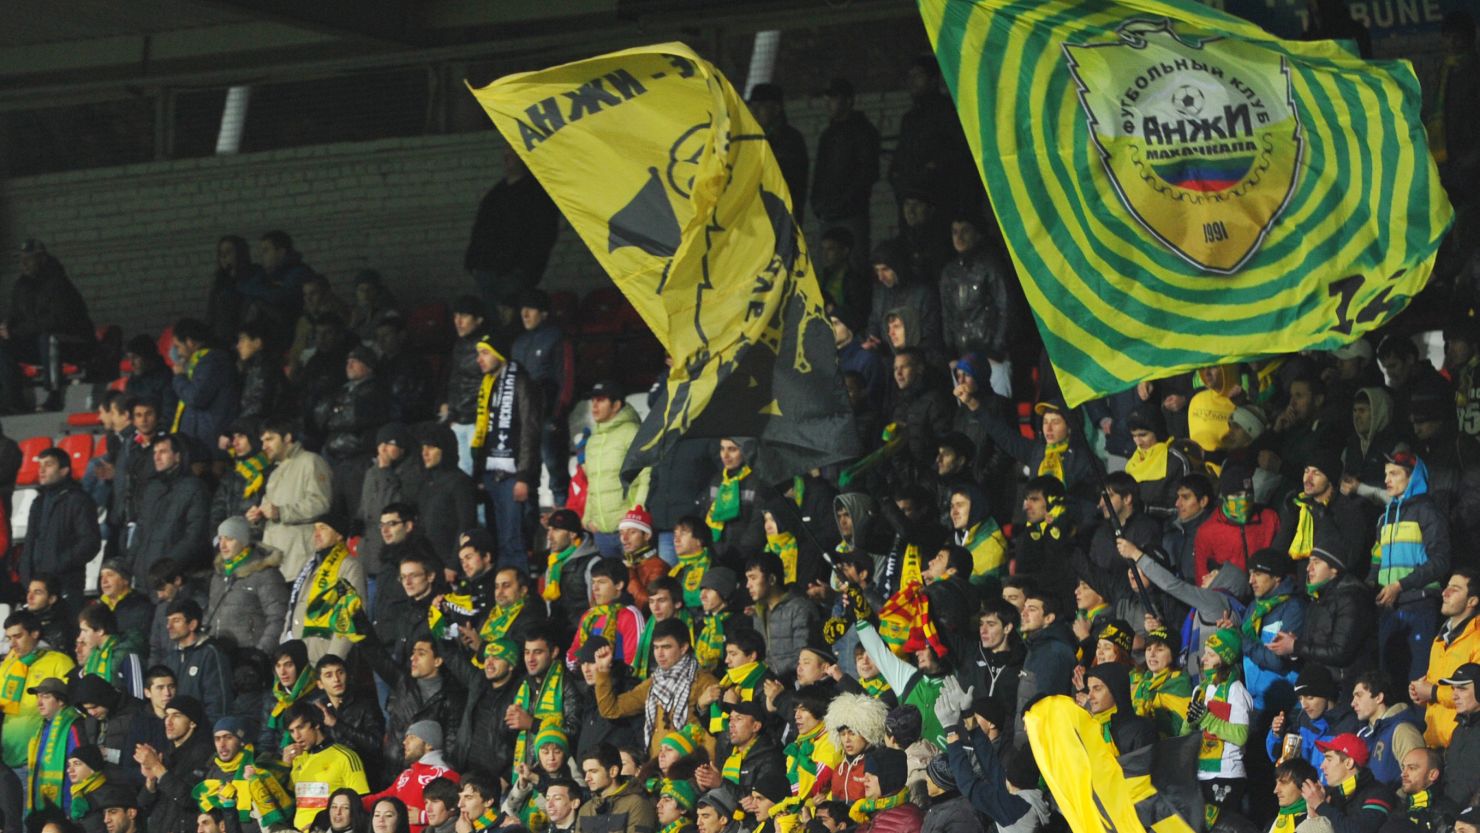 Anzhi Makhachkala are based in the troubled Dagestan region of Russia.